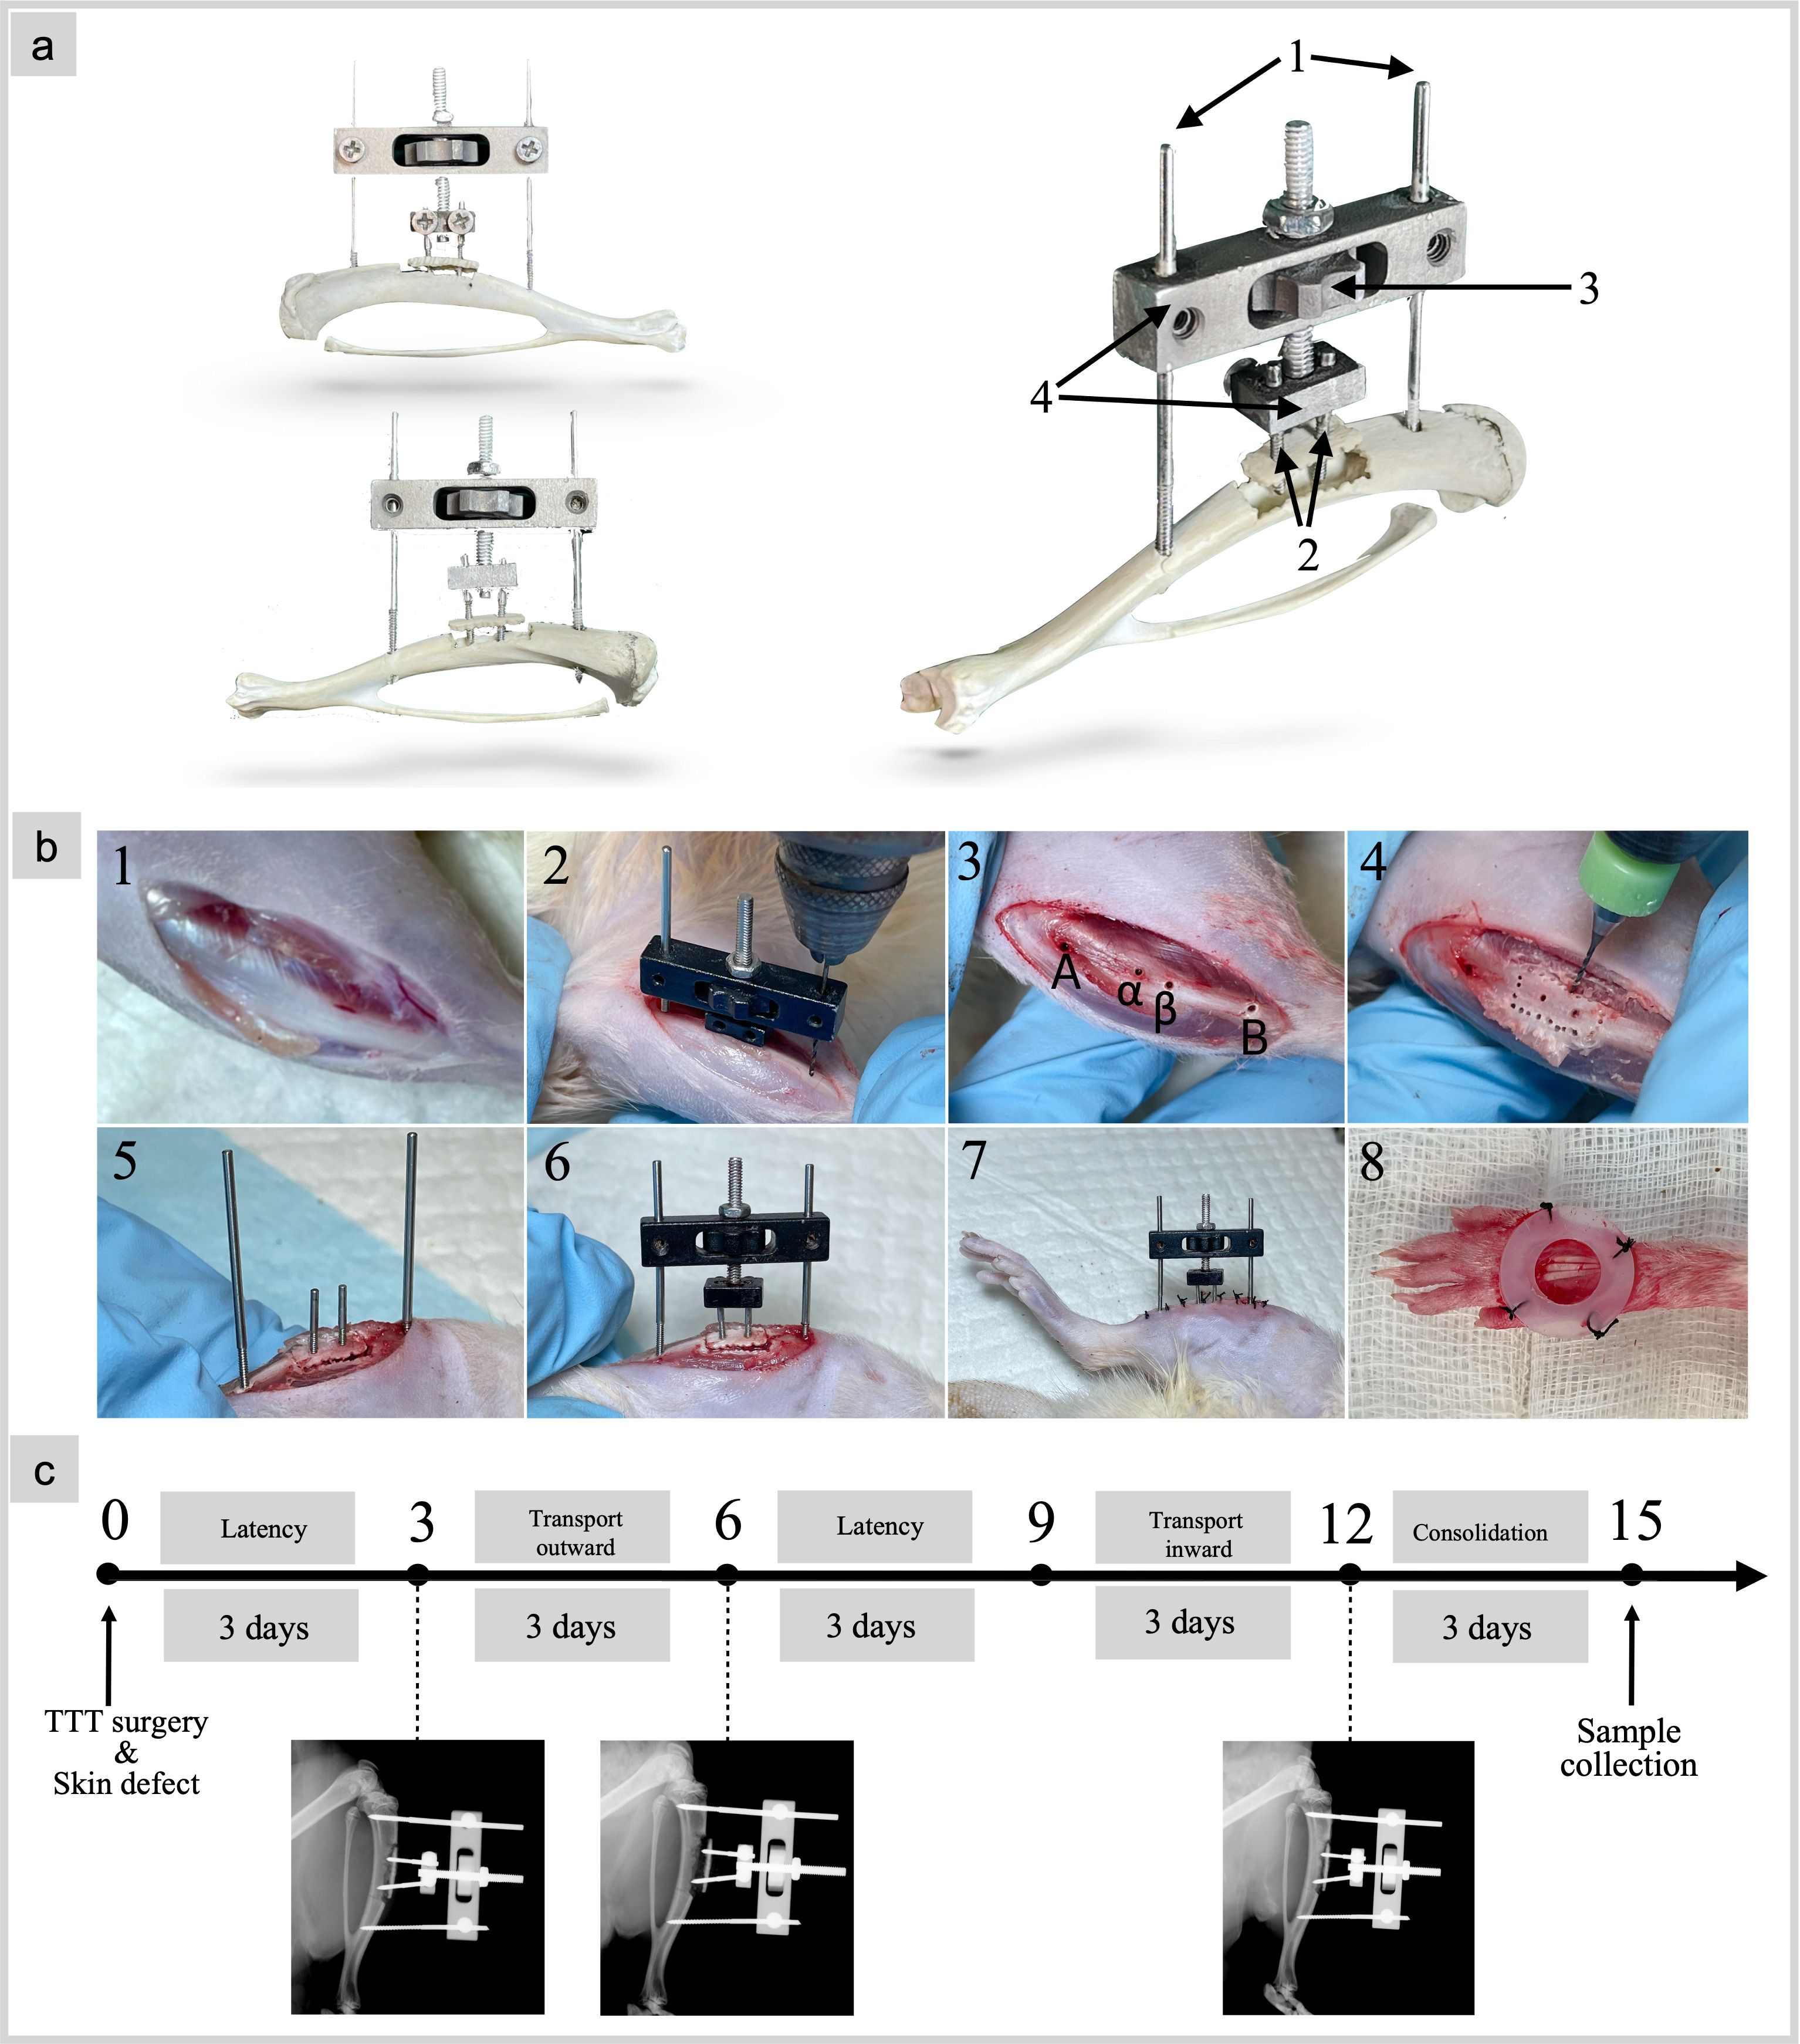 Fig. 1 
            Introduction of tibial cortex transverse transport (TTT) external fixator, surgical procedure and workflow. a) Components of TTT external fixator: 1) two long screws; 2) two small screws; 3) a turning nut; and 4) the external fixator frame. b) Surgical procedure of TTT technique and skin defect: 1) The right tibia was exposed; 2) and 3) guided with the external fixator, holes A, B, α, and β were drilled; 4) pinholes were drilled around holes α and β, forming a bone window; 5) four screws were inserted; 6) and 7) the cortical bone chip was dislocated, and the external fixator was assembled and incision sutured; and 8) a silicone splint was fixed to the wound skin. c) Workflow of TTT application. A radiograph was taken to track the cortical bone chip status.
          